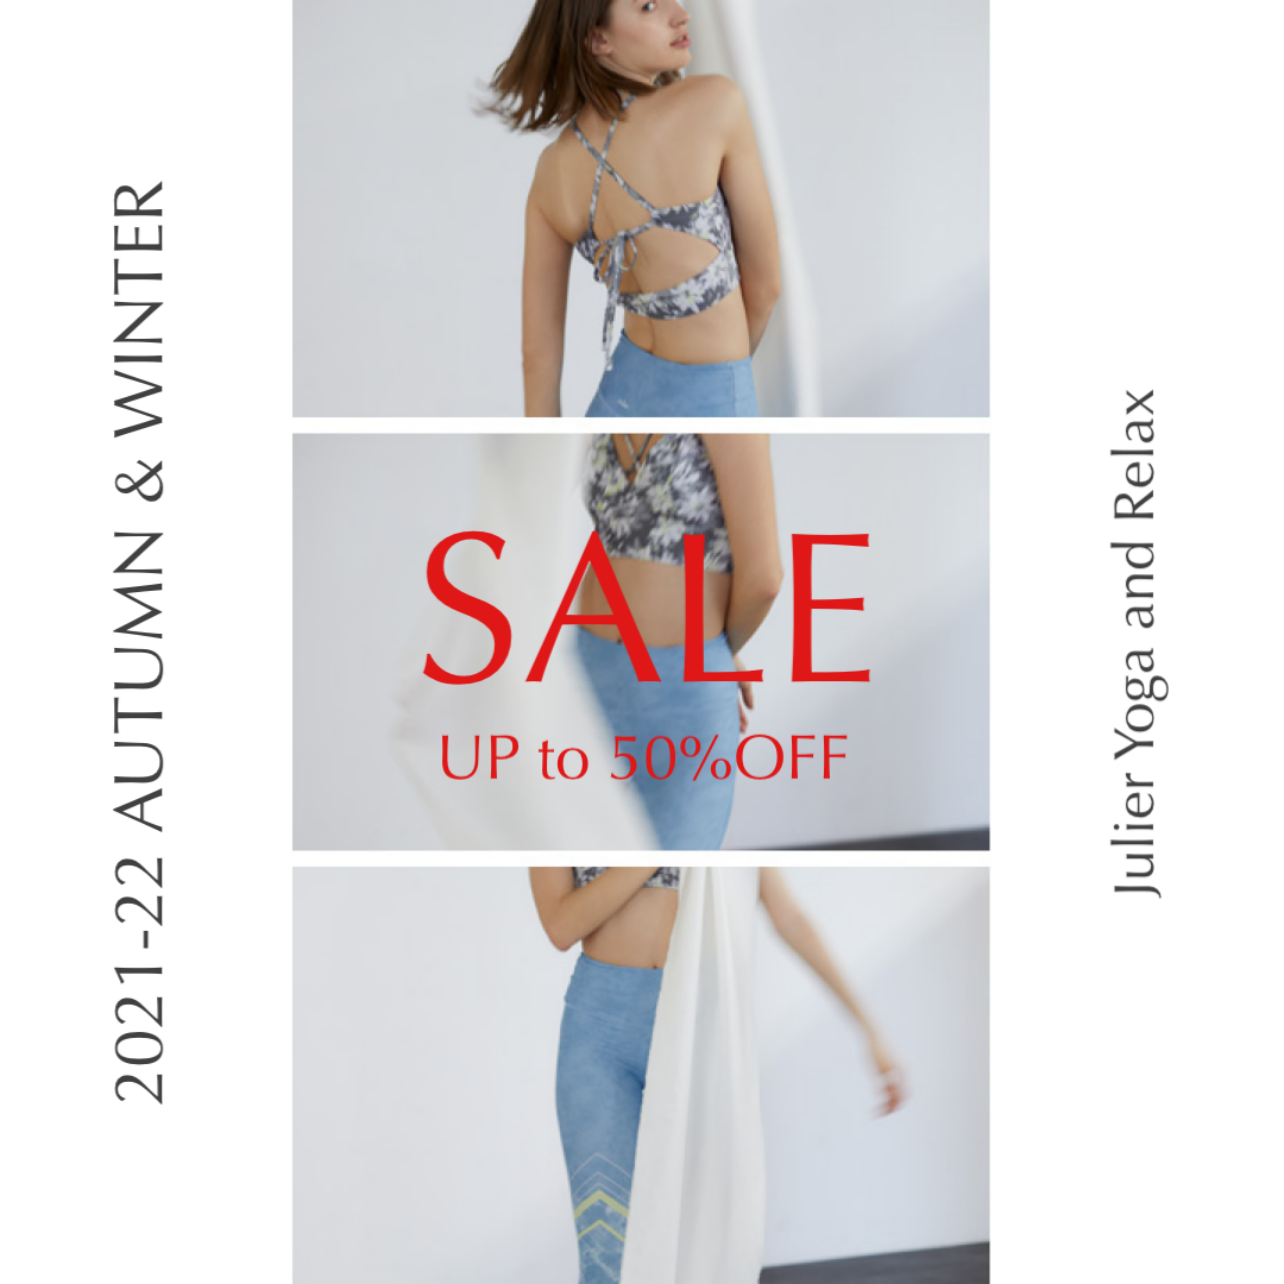 MORE SALE !! UP to 50%OFF